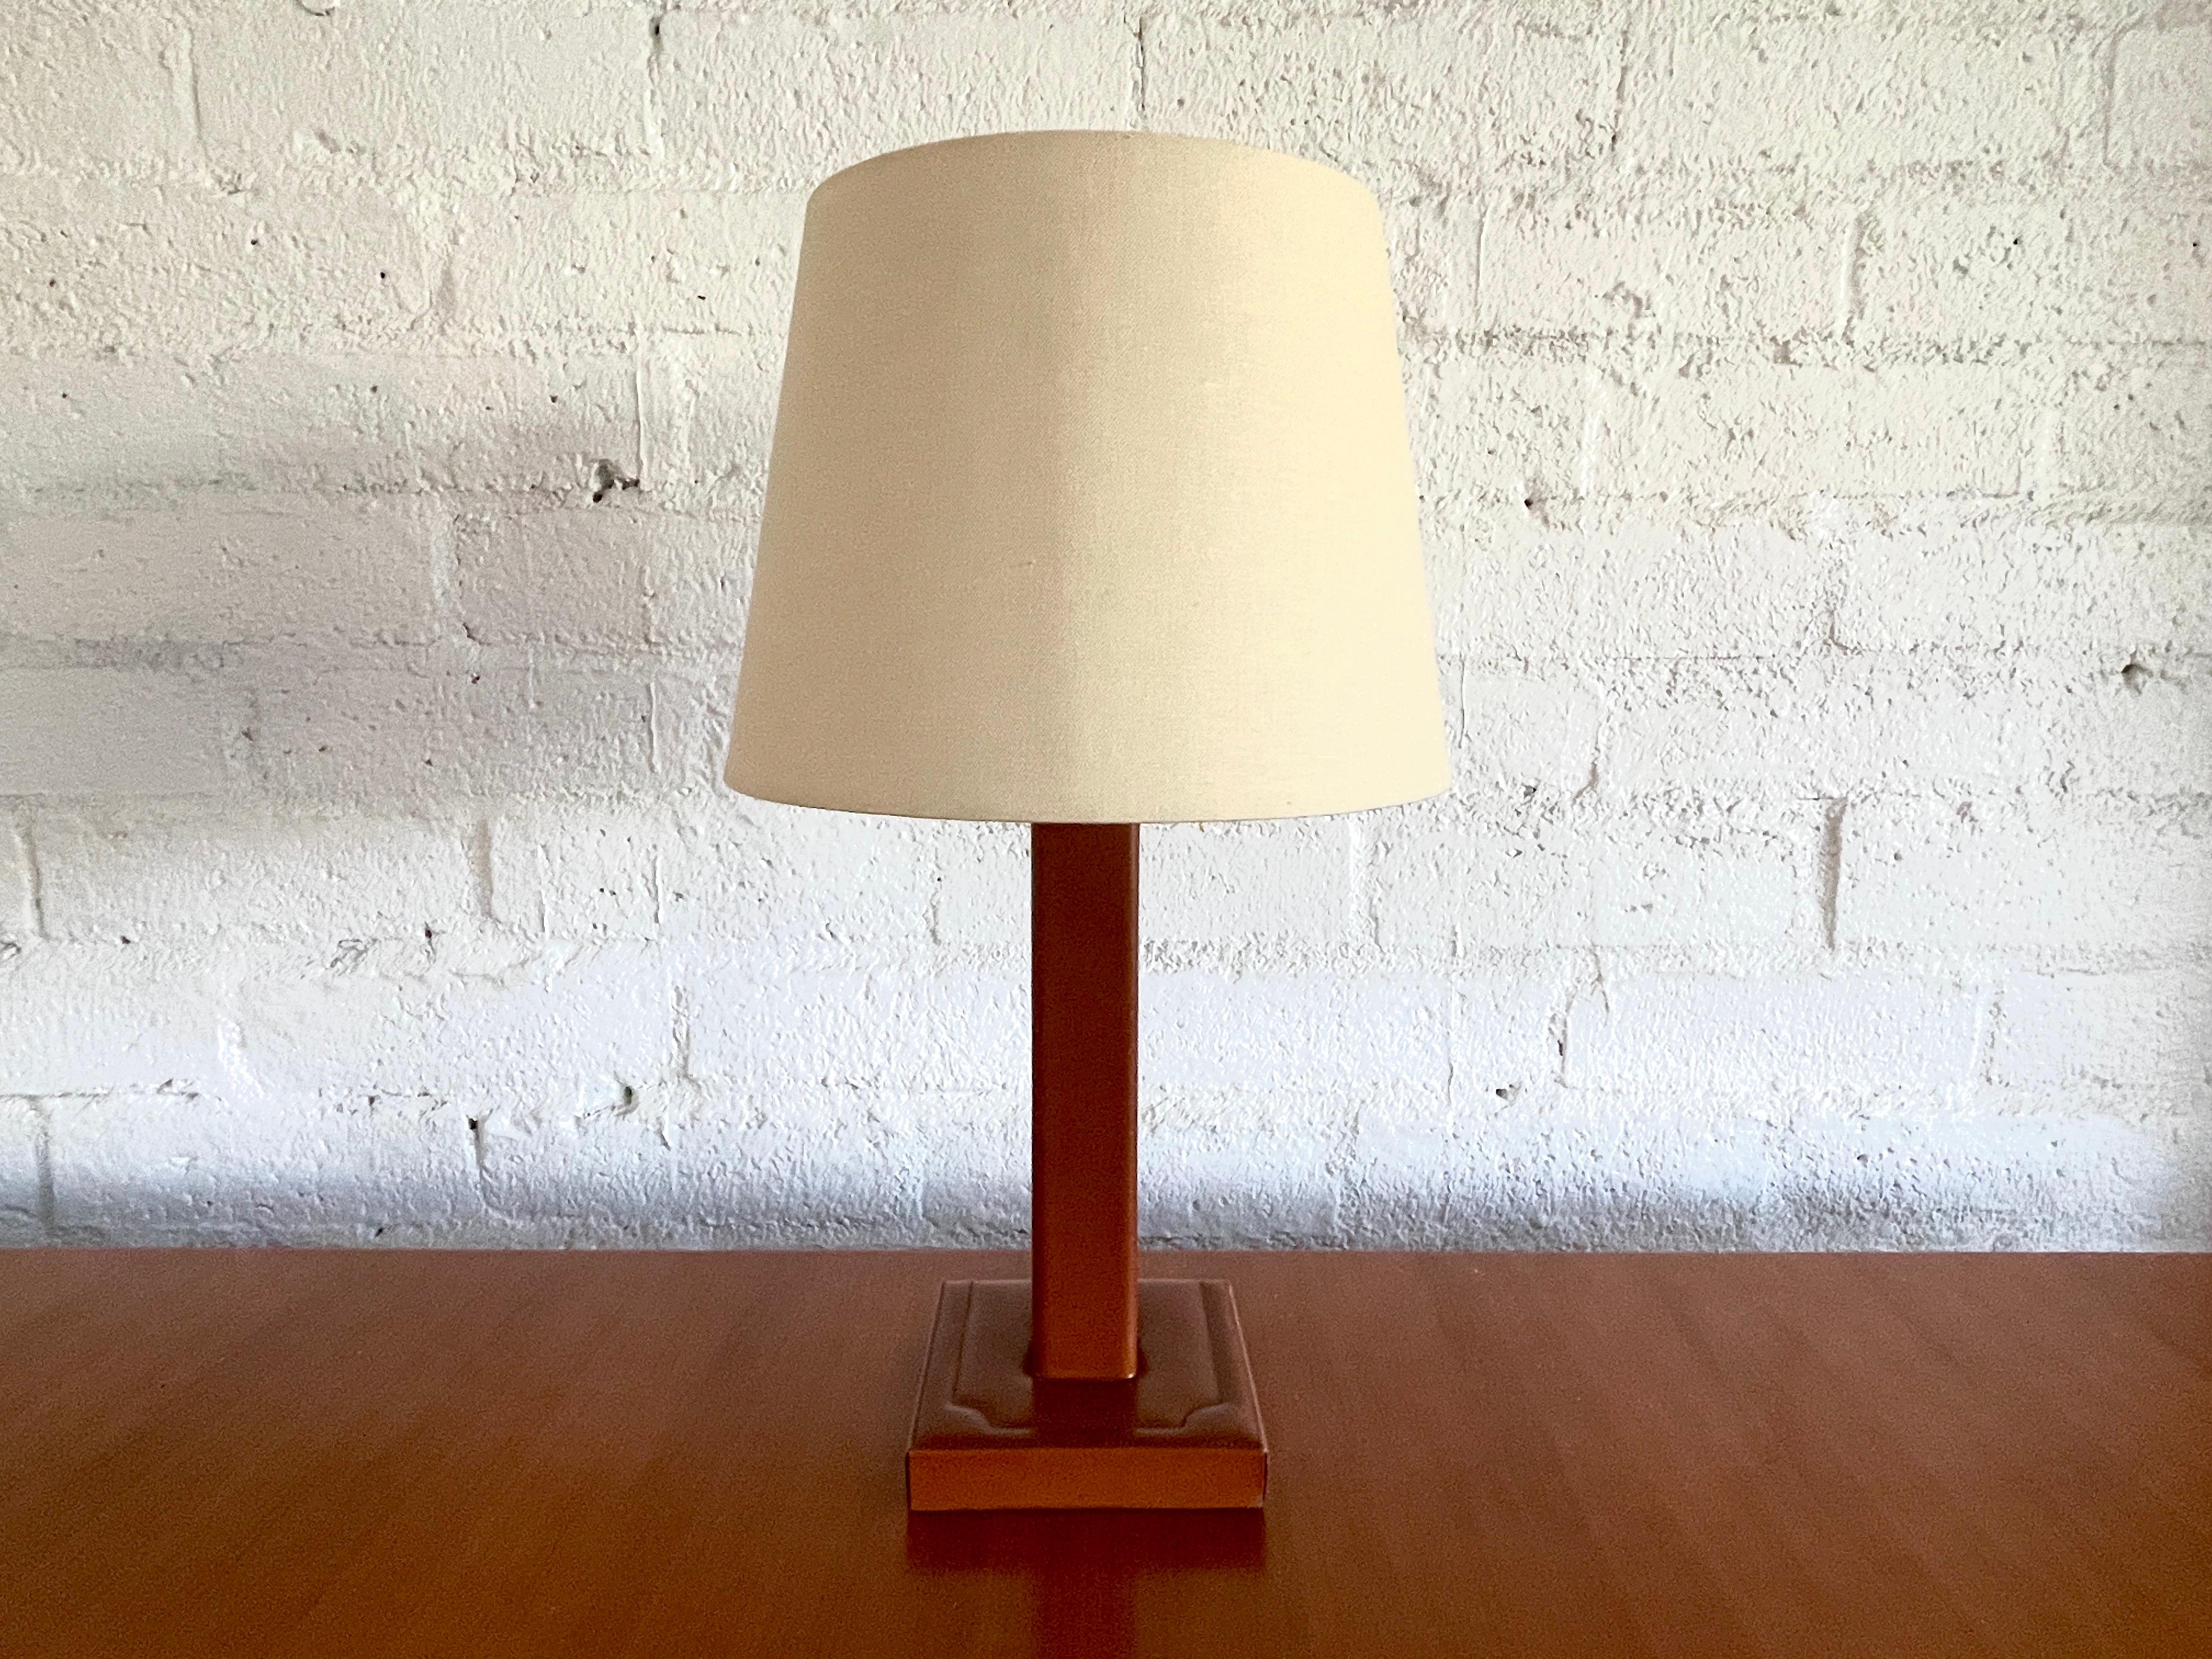 Jacques Adnet style table lamp in aged saddle brown leather with signature contrast stitching.
New silk shade and newly rewired.